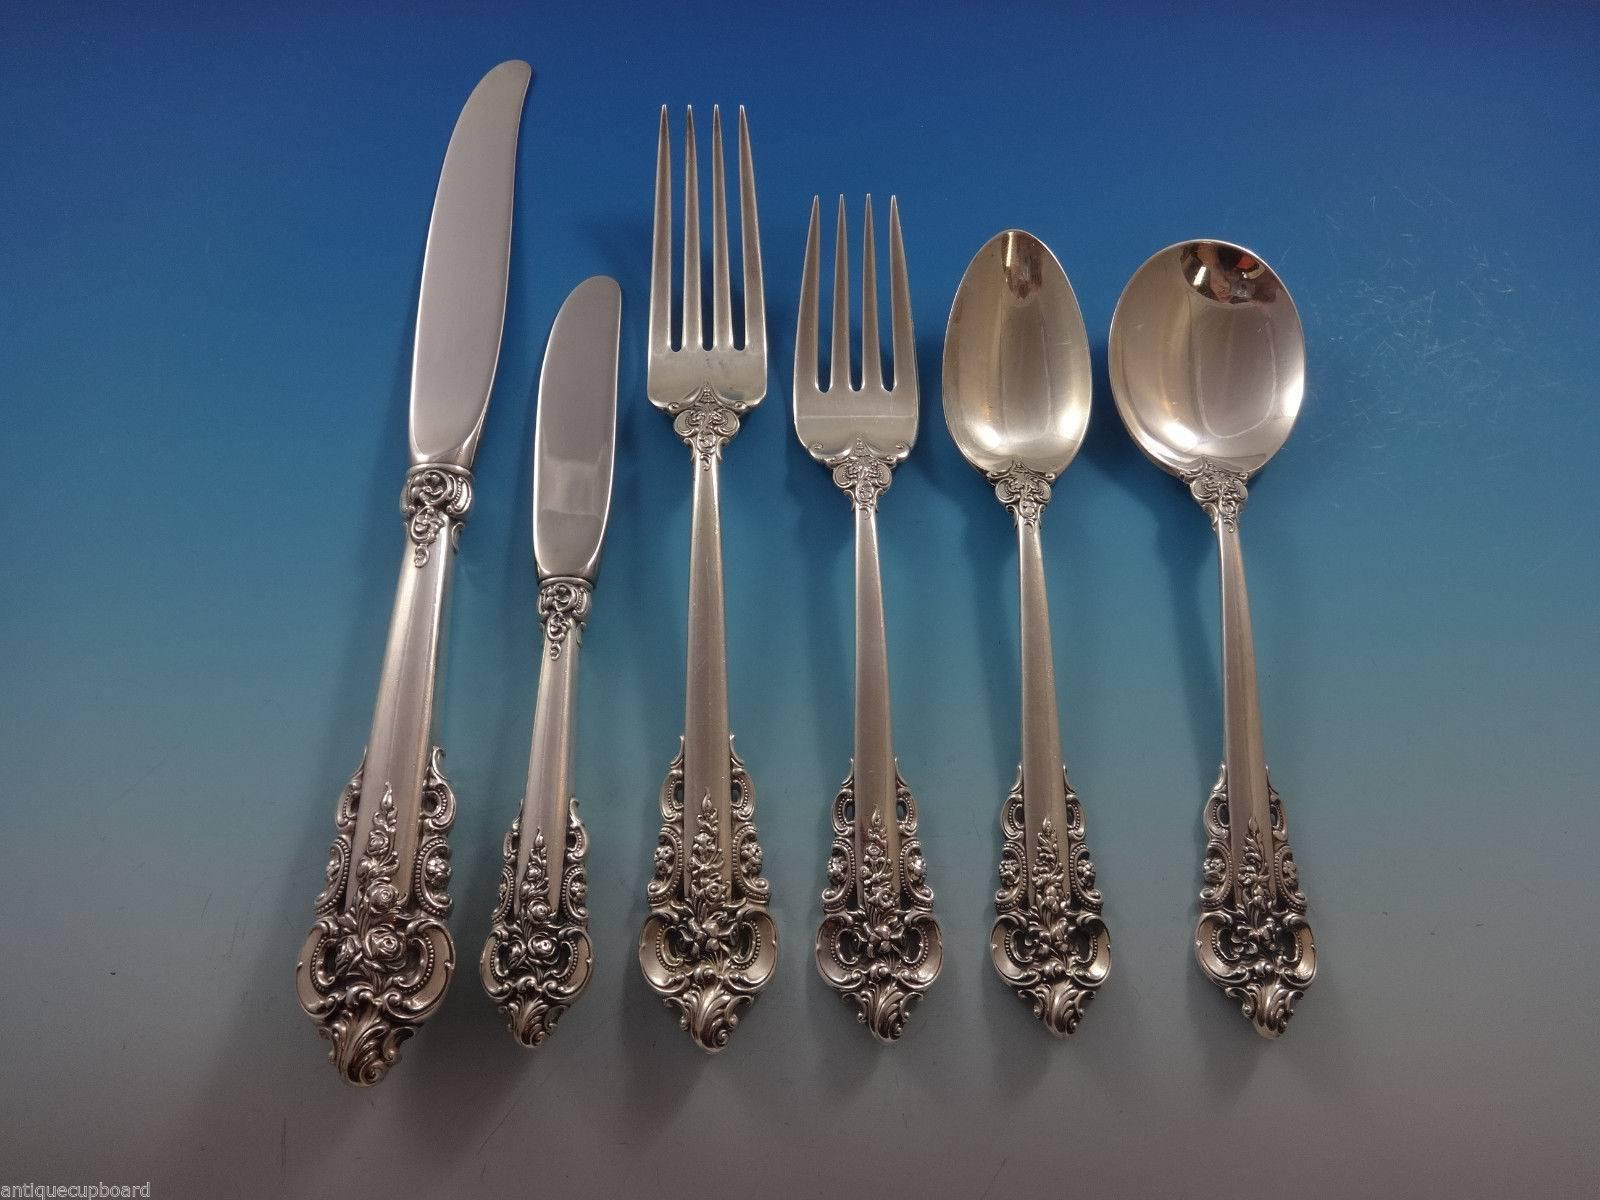 Monumental Grande Baroque by Wallace Sterling silver flatware set of 116 pieces. This set includes:

18 knives, 8 7/8